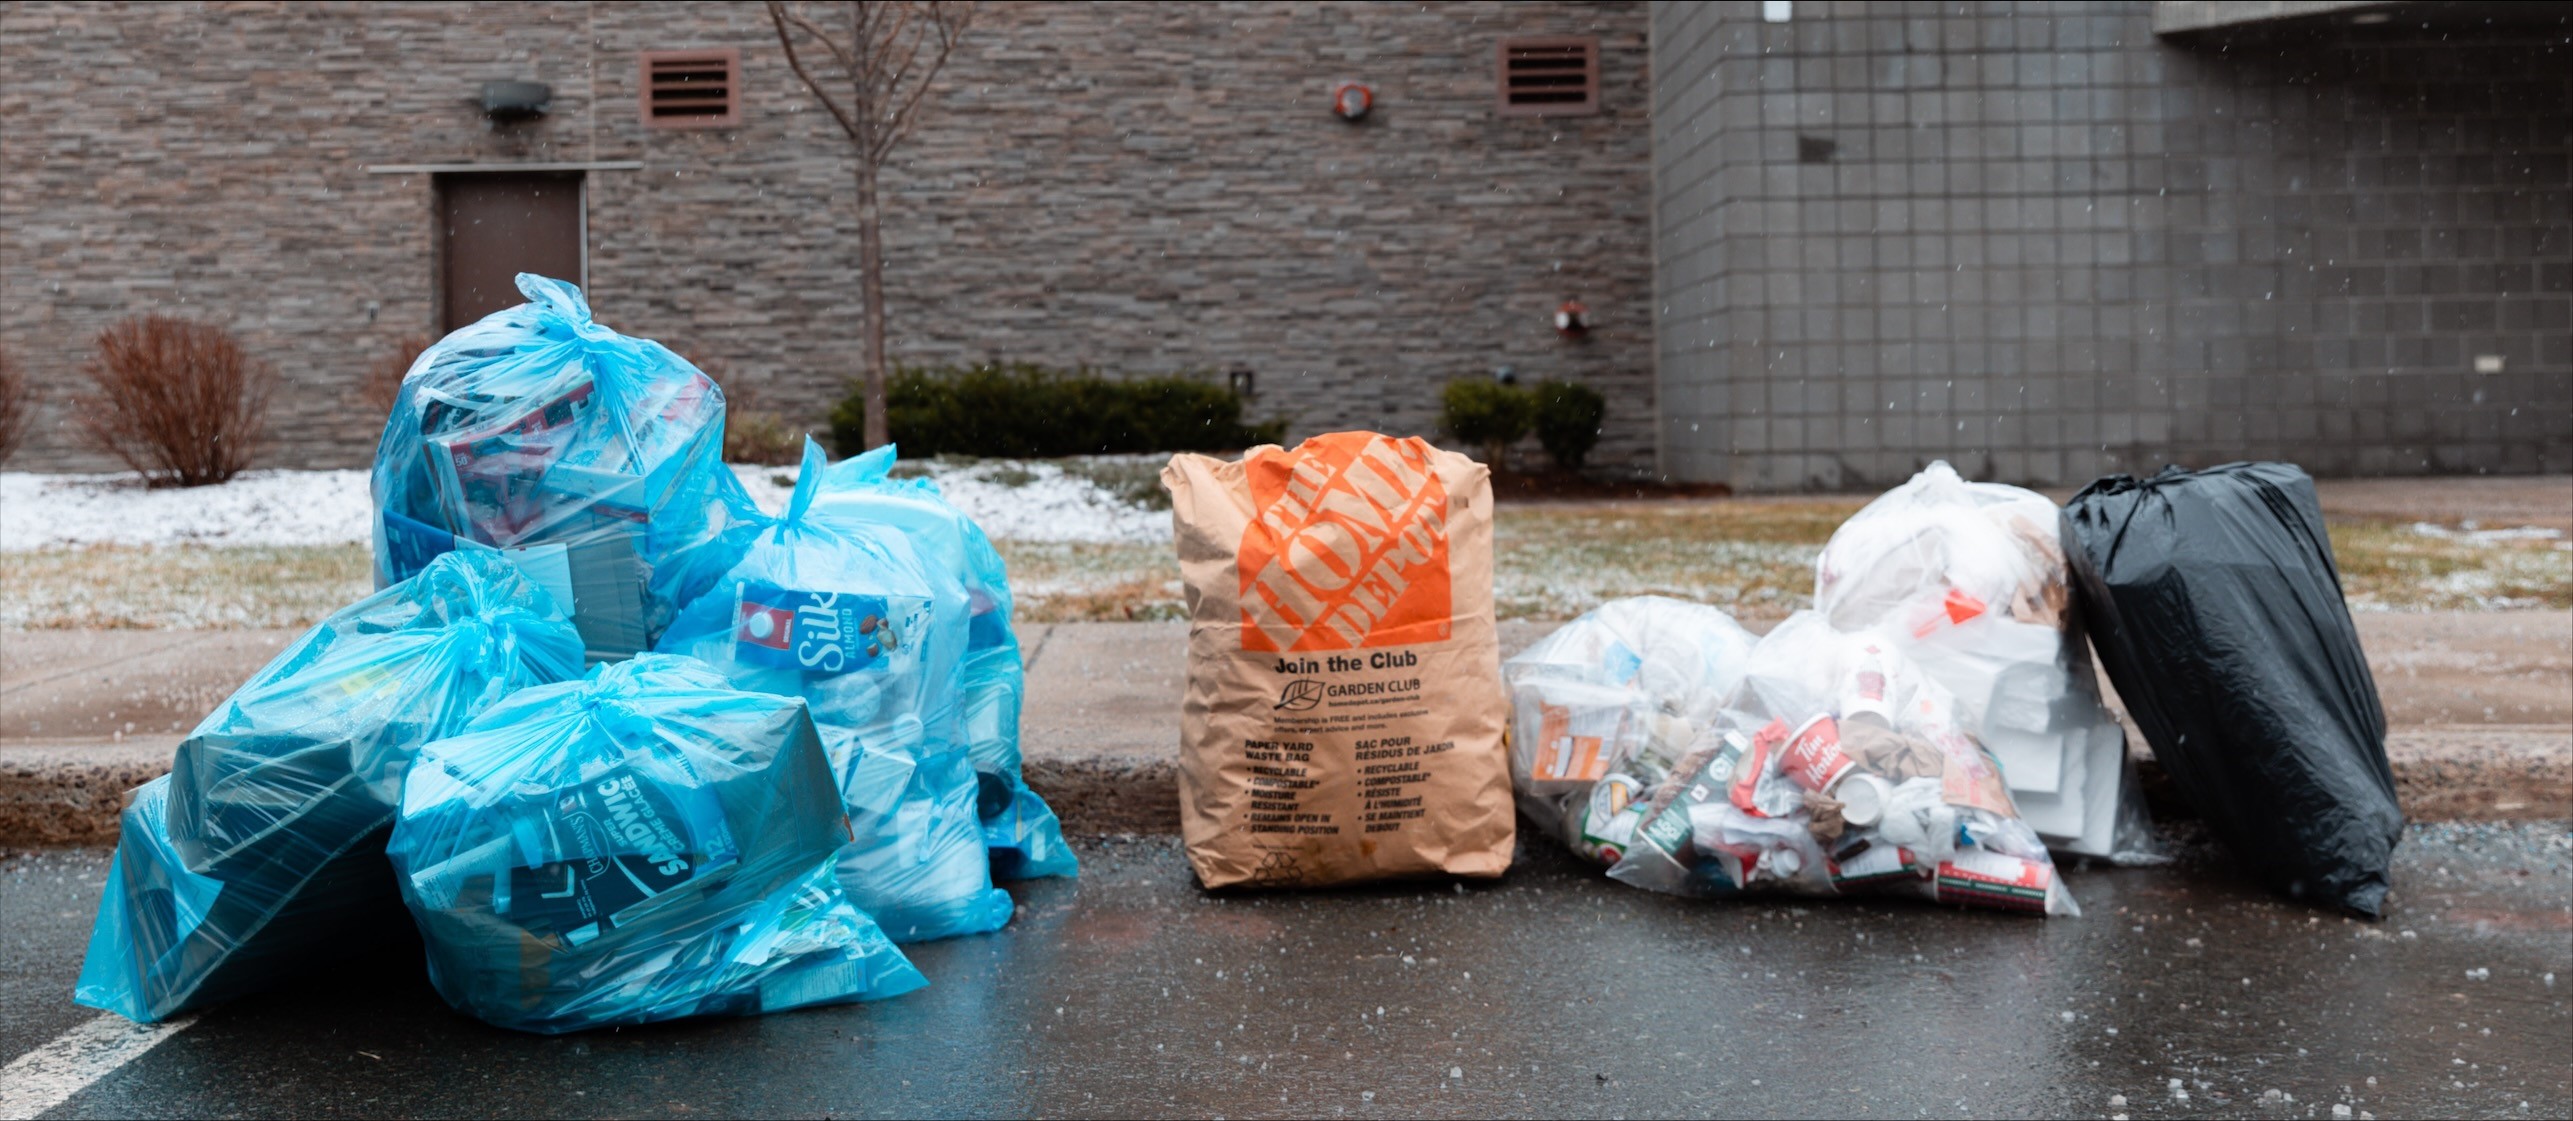 waste set out to curb with blue recycling bags, yard waste bags, and clear garbage bags with one nontransparent black bag